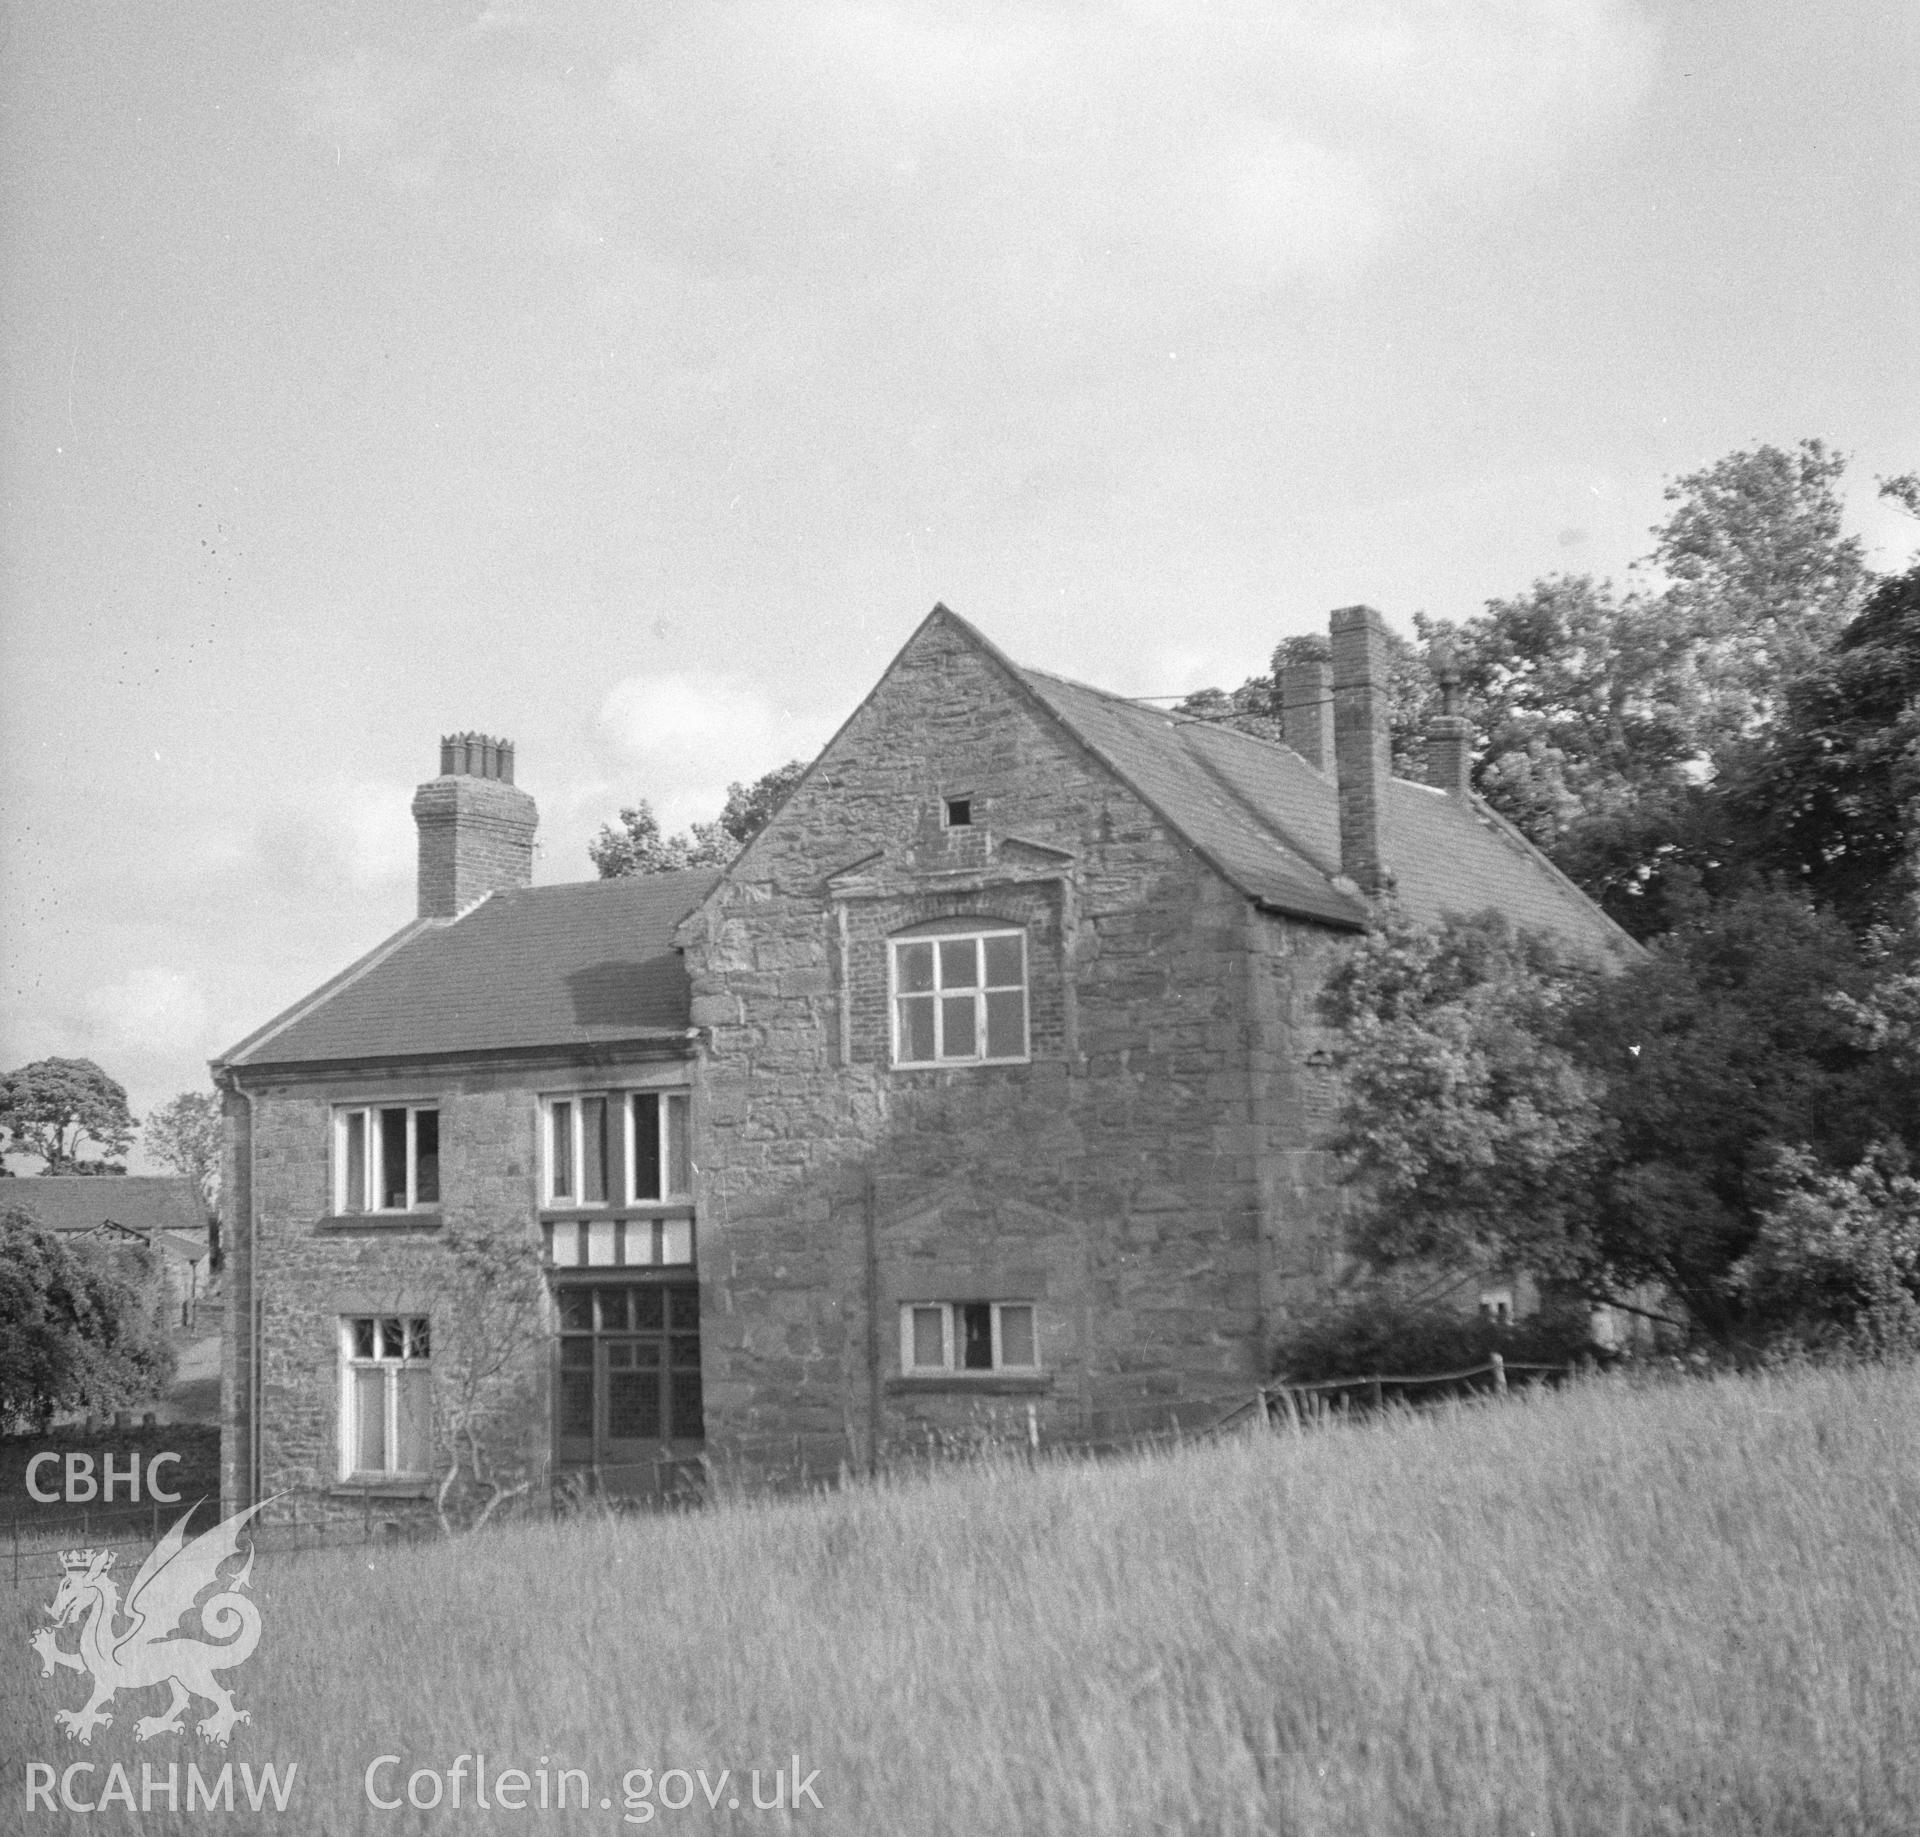 Digital copy of a black and white nitrate negative showing exterior view of Llyseurgain, Northop.